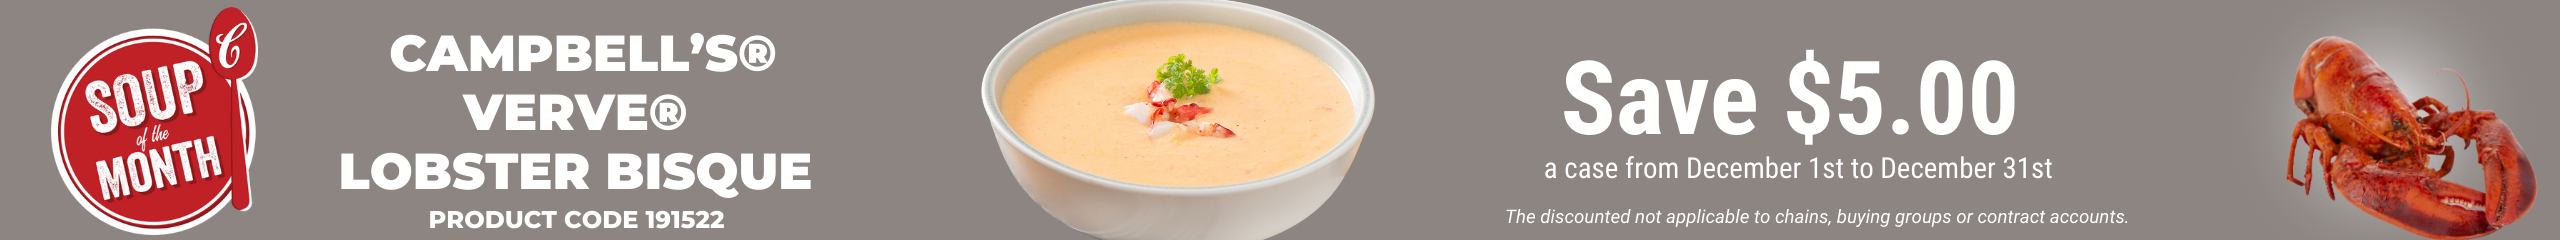 Campbells Soup of the Month - Lobster Bisque